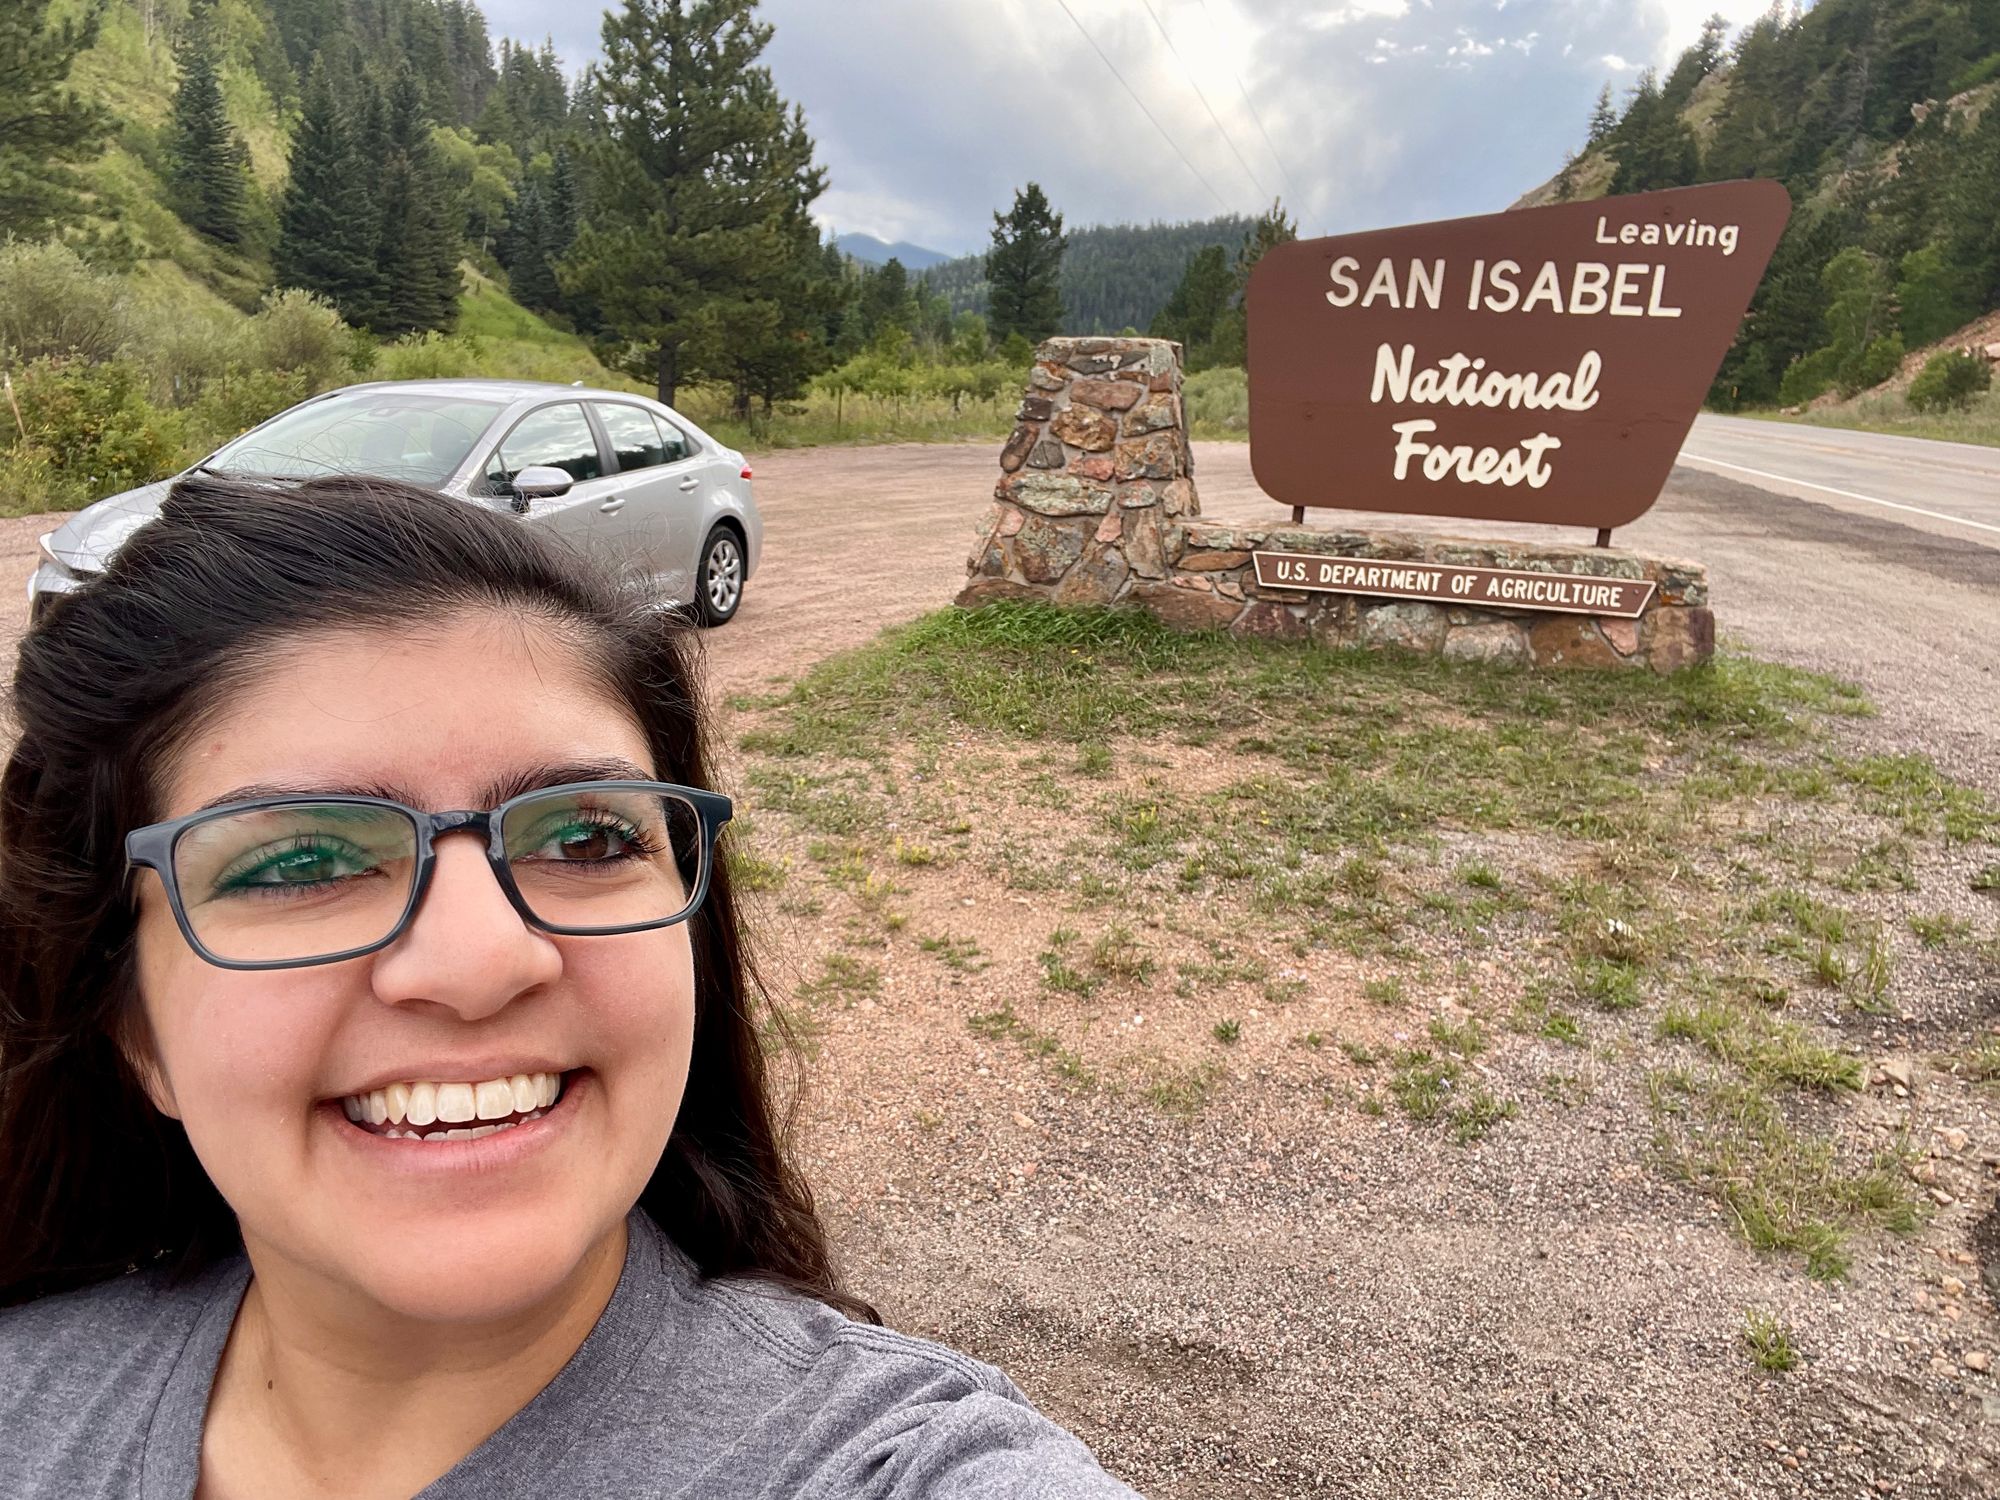 Meera posing in front of the "Leave San Isabel National Forest" sign.